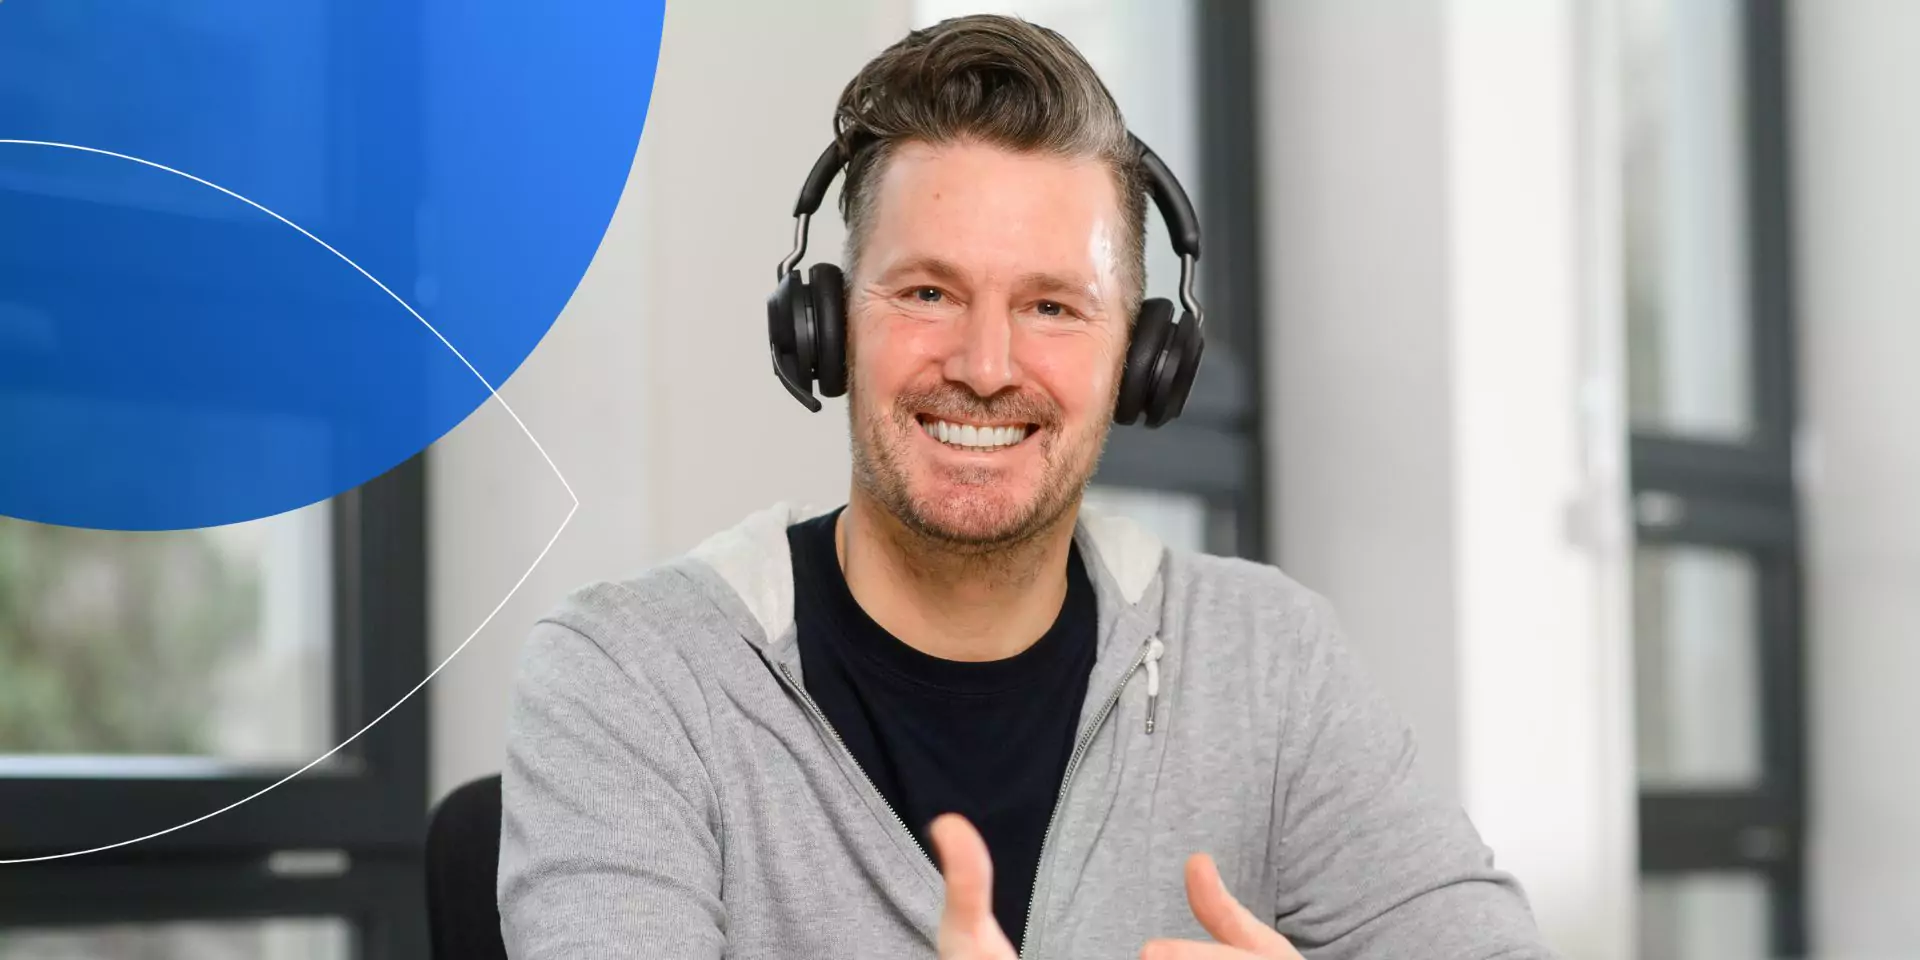 man wearing headphones smiling to camera with hand gesture